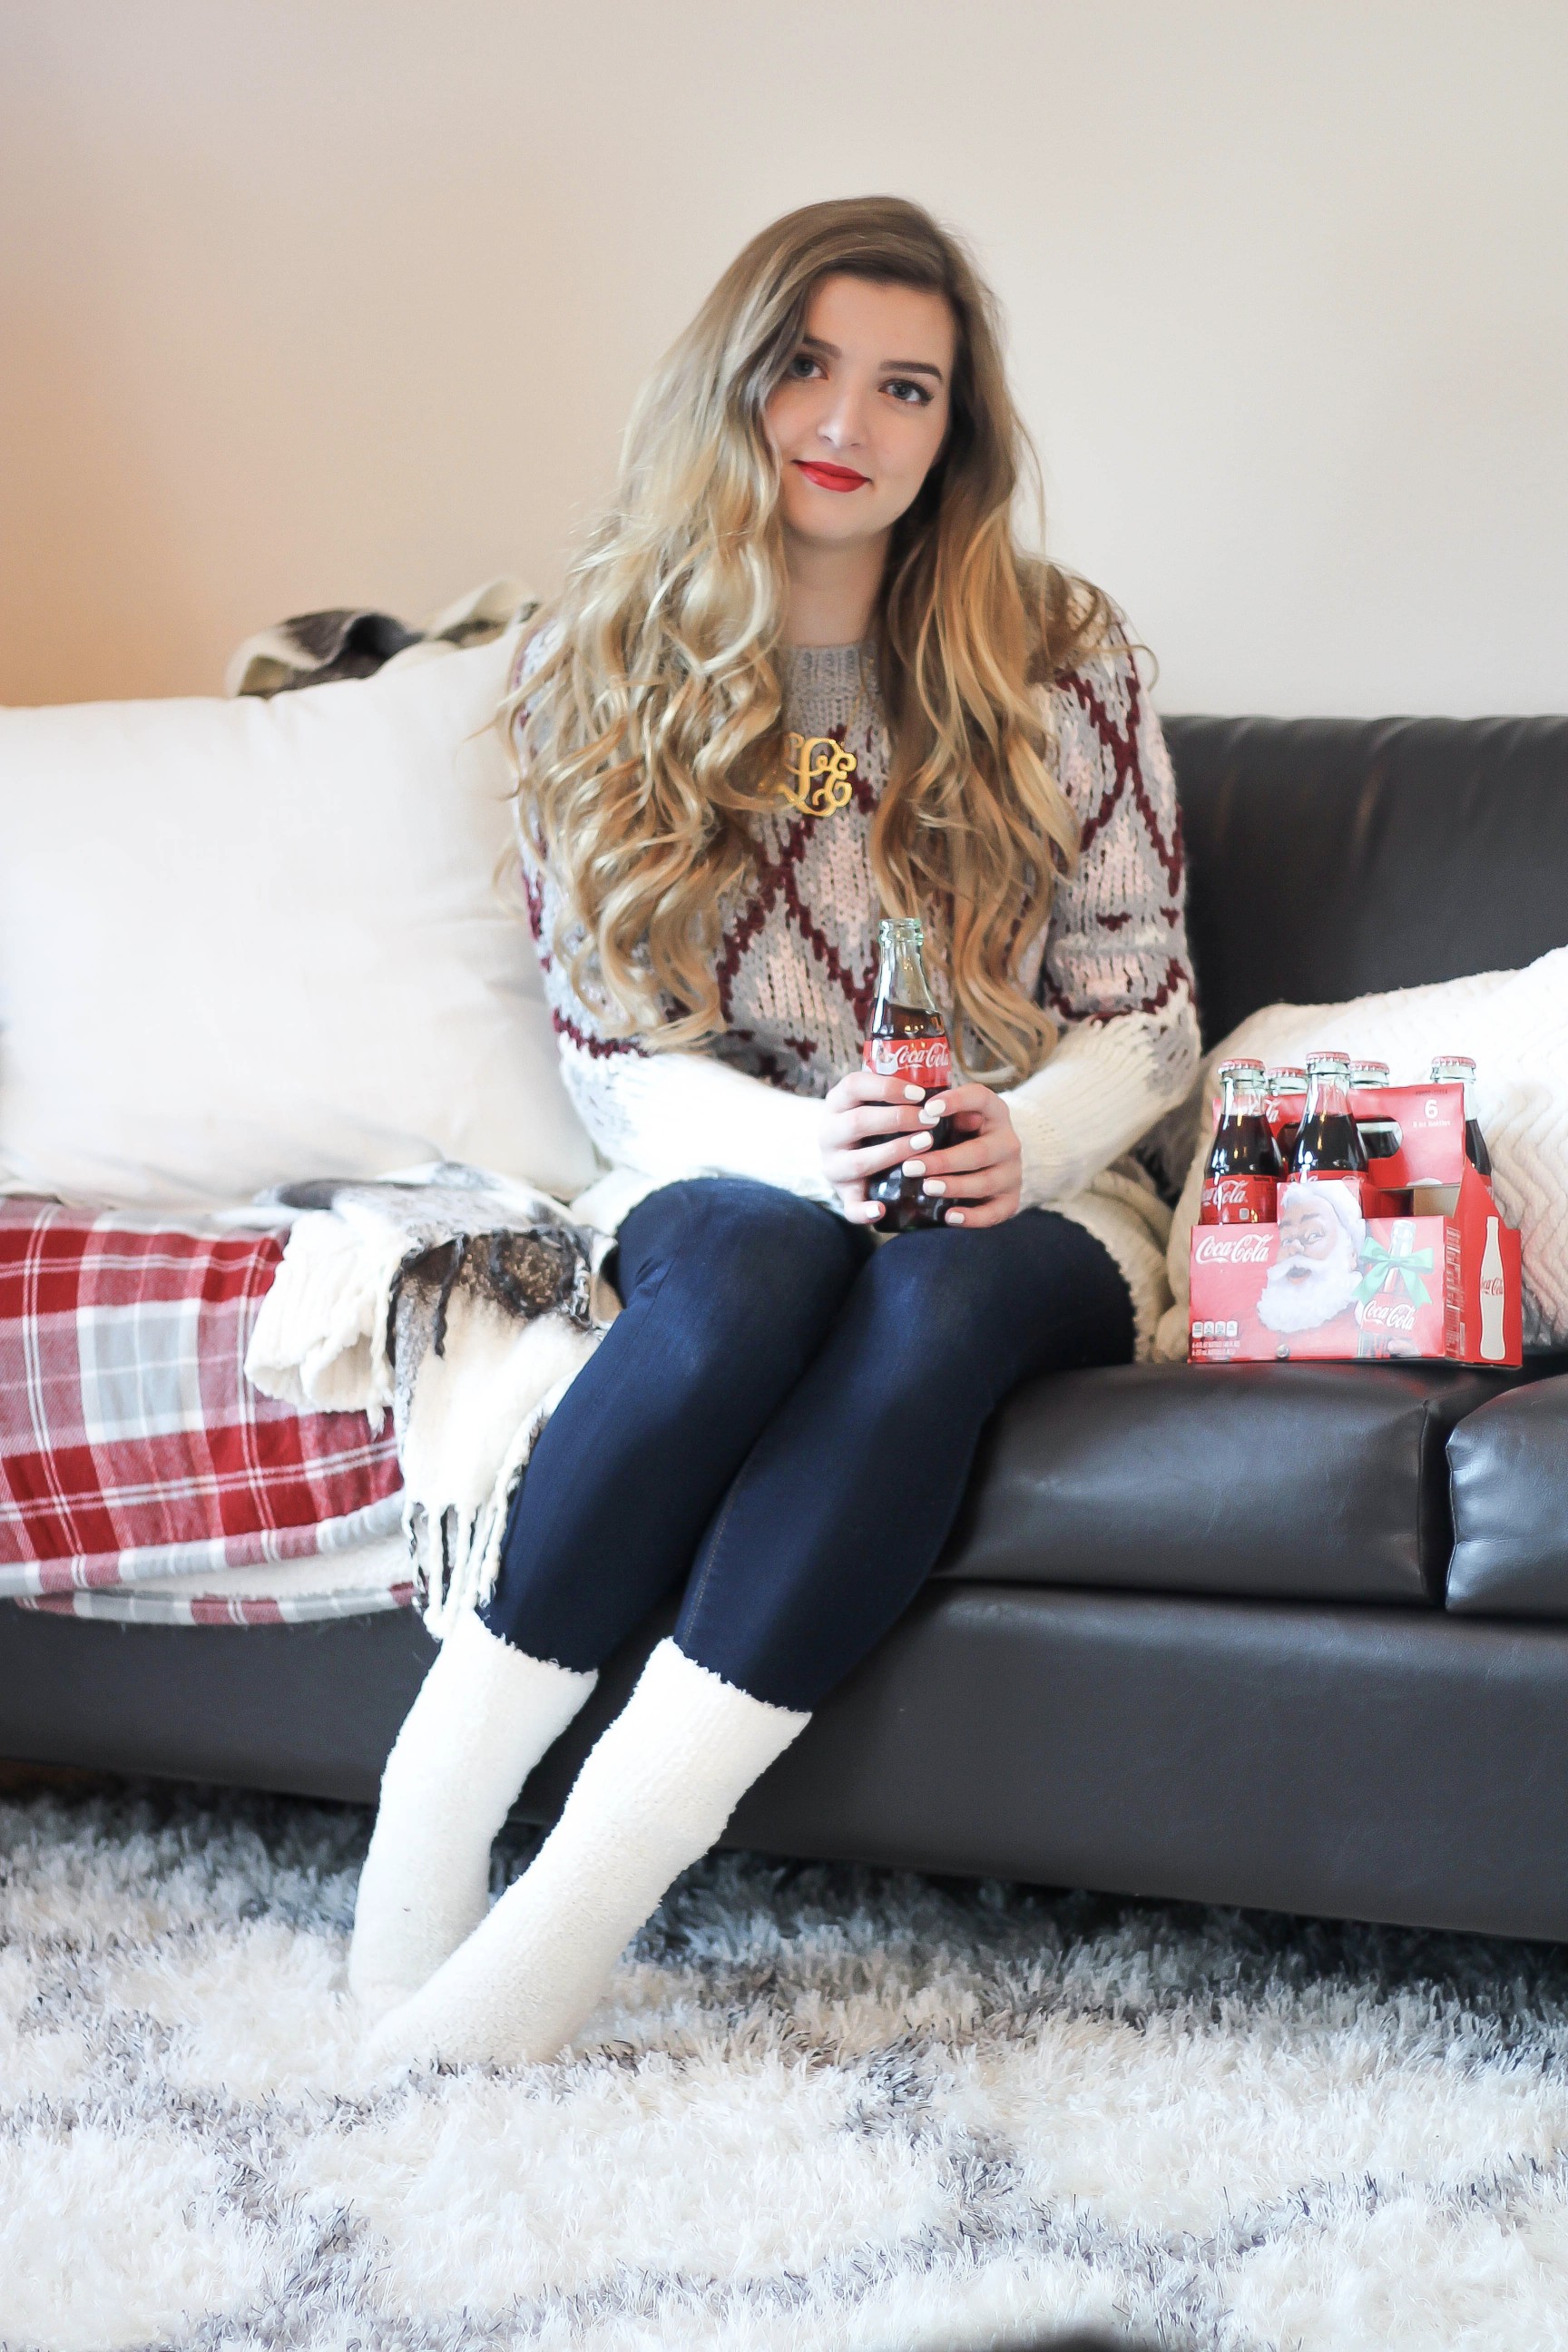 SLEIGH YOUR LOOK! Adorable oversized sweater with fun colors and pattern. Super cozy winter outfit. Pomeranian puppy, white Pomeranian, miniature Pomeranian, toy Pomeranian, red lips and curled hair by Lauren Lindmark dailydoseofcharm.com daily dose of charm